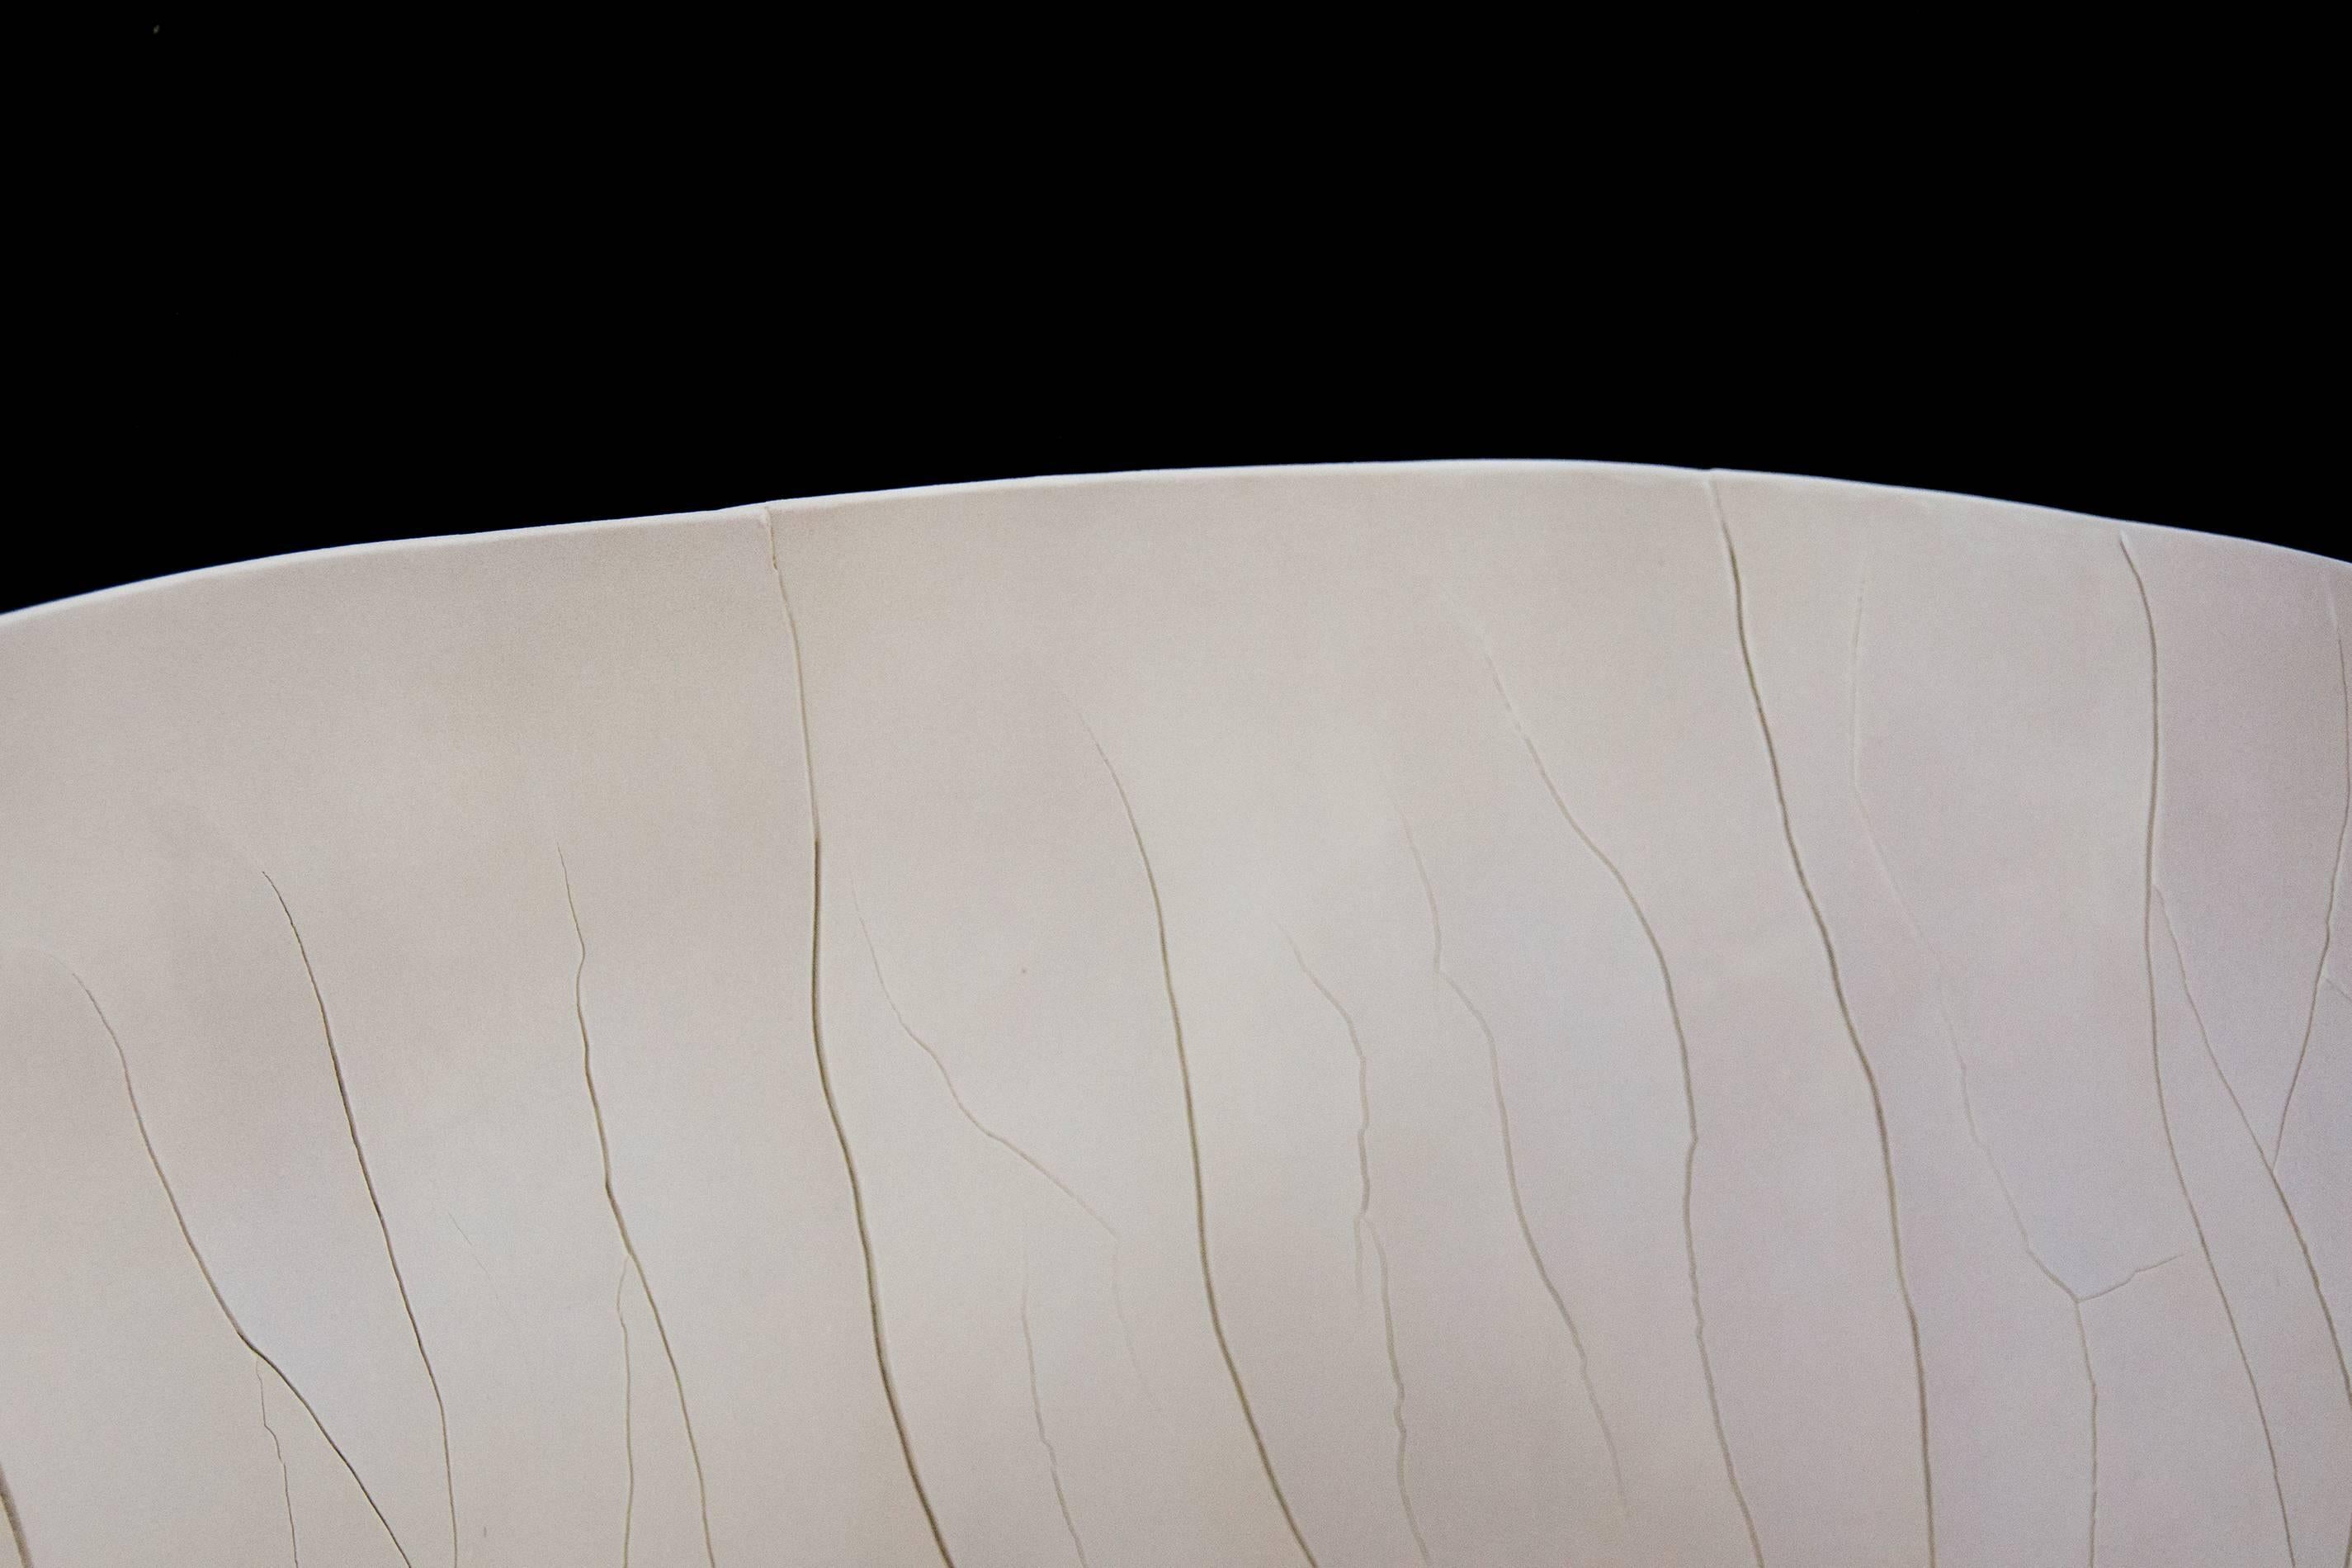 The polished surface of this off white 16 inch tall vessel is articulated with fissures created through the interaction of fibreglass filaments inserted into the wet porcelain clay before firing. The materials, color and texture of this piece speak